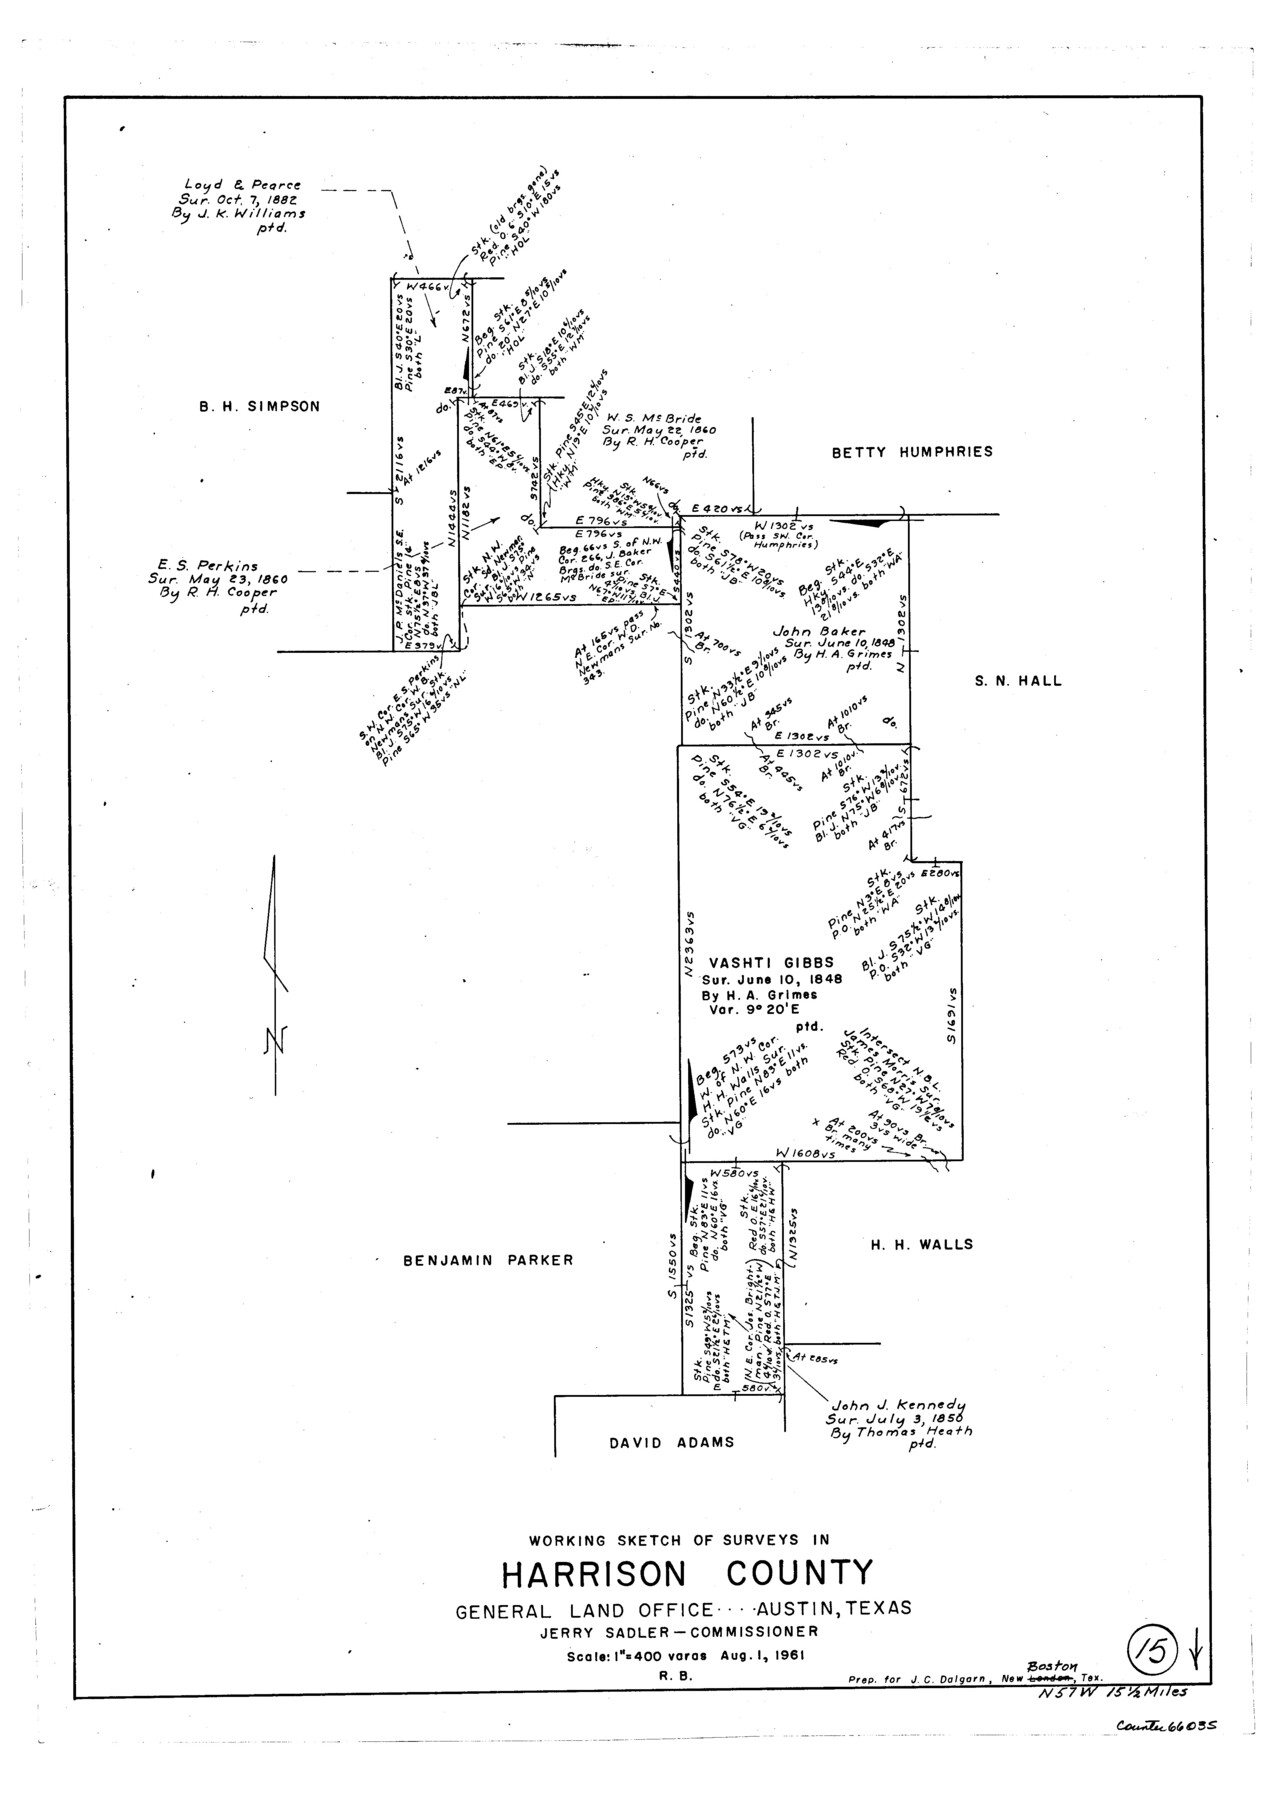 66035, Harrison County Working Sketch 15, General Map Collection